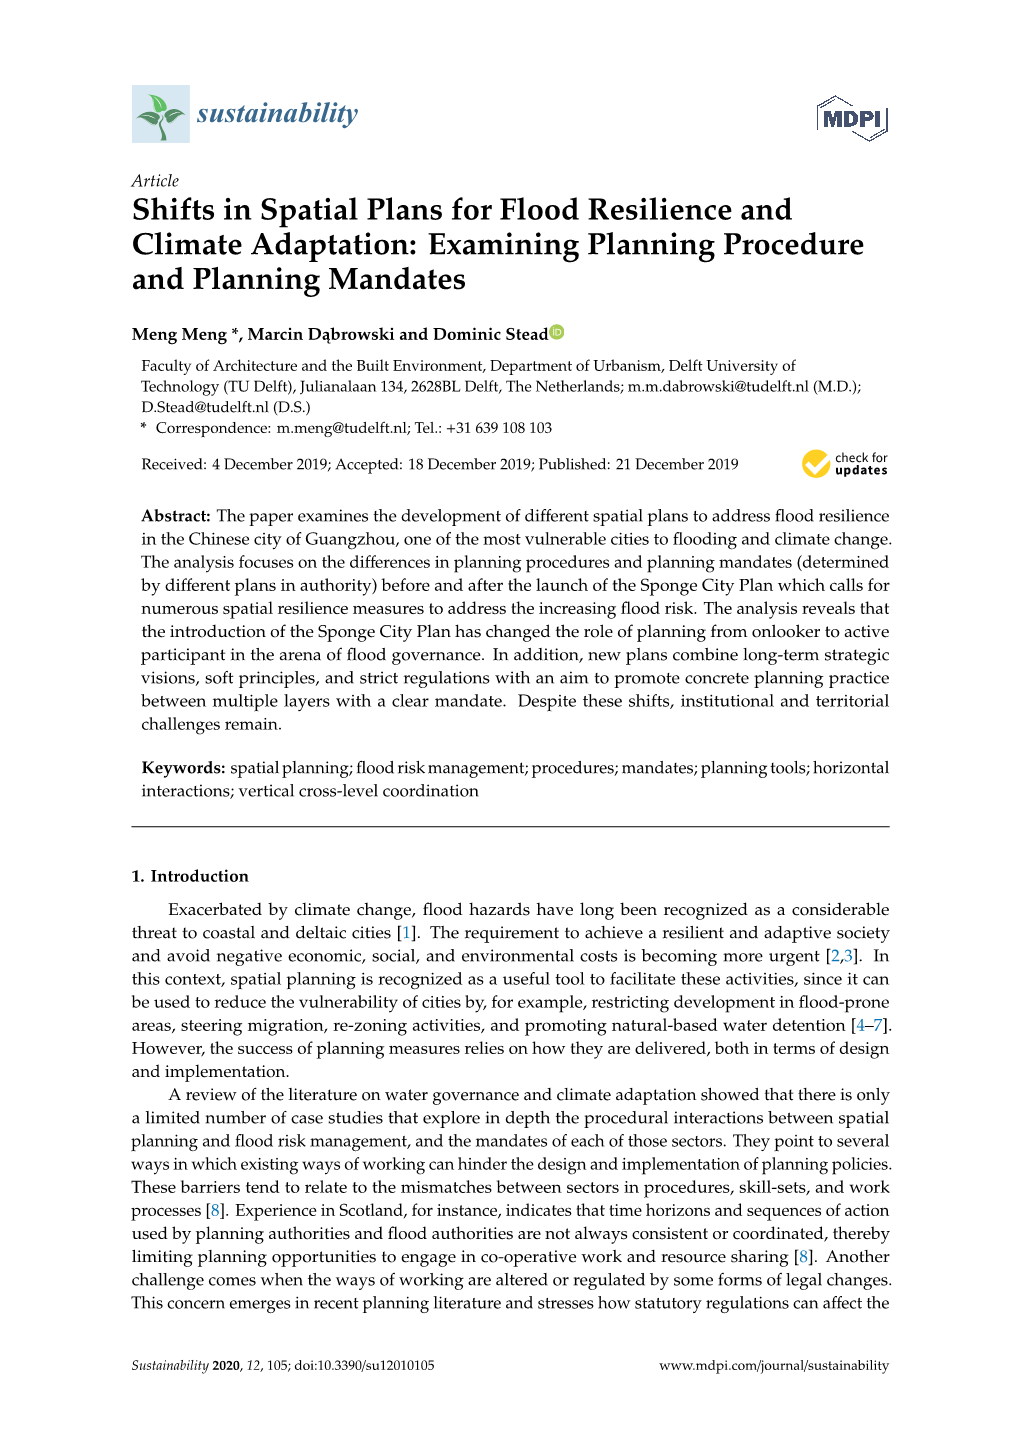 Shifts in Spatial Plans for Flood Resilience and Climate Adaptation: Examining Planning Procedure and Planning Mandates